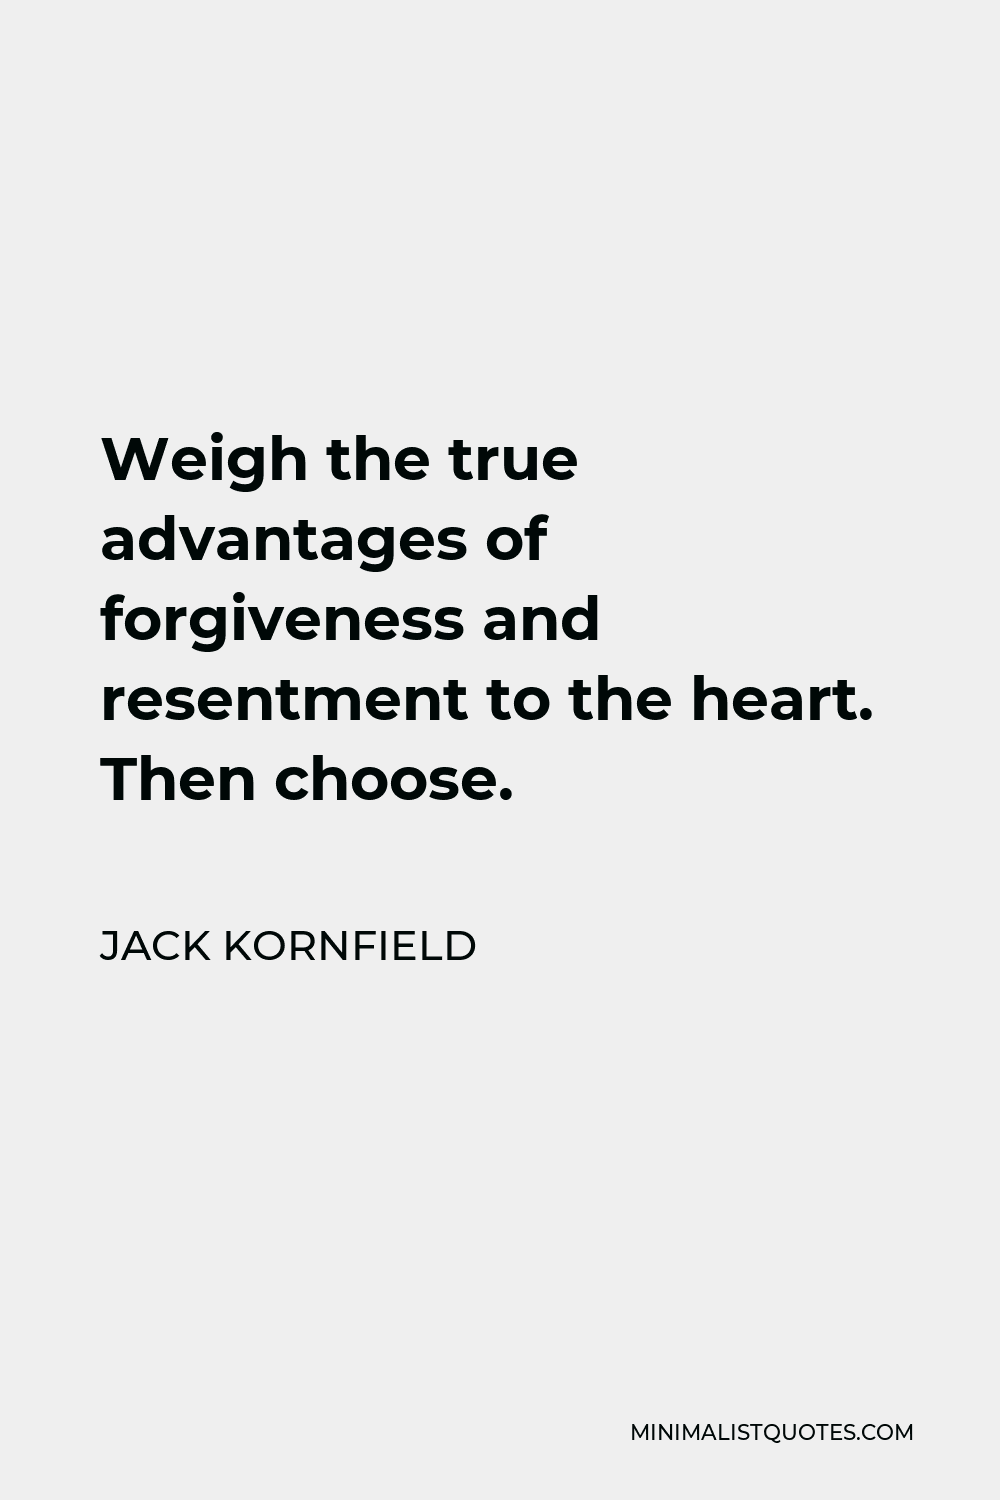 Jack Kornfield Quote - Weigh the true advantages of forgiveness and resentment to the heart. Then choose.